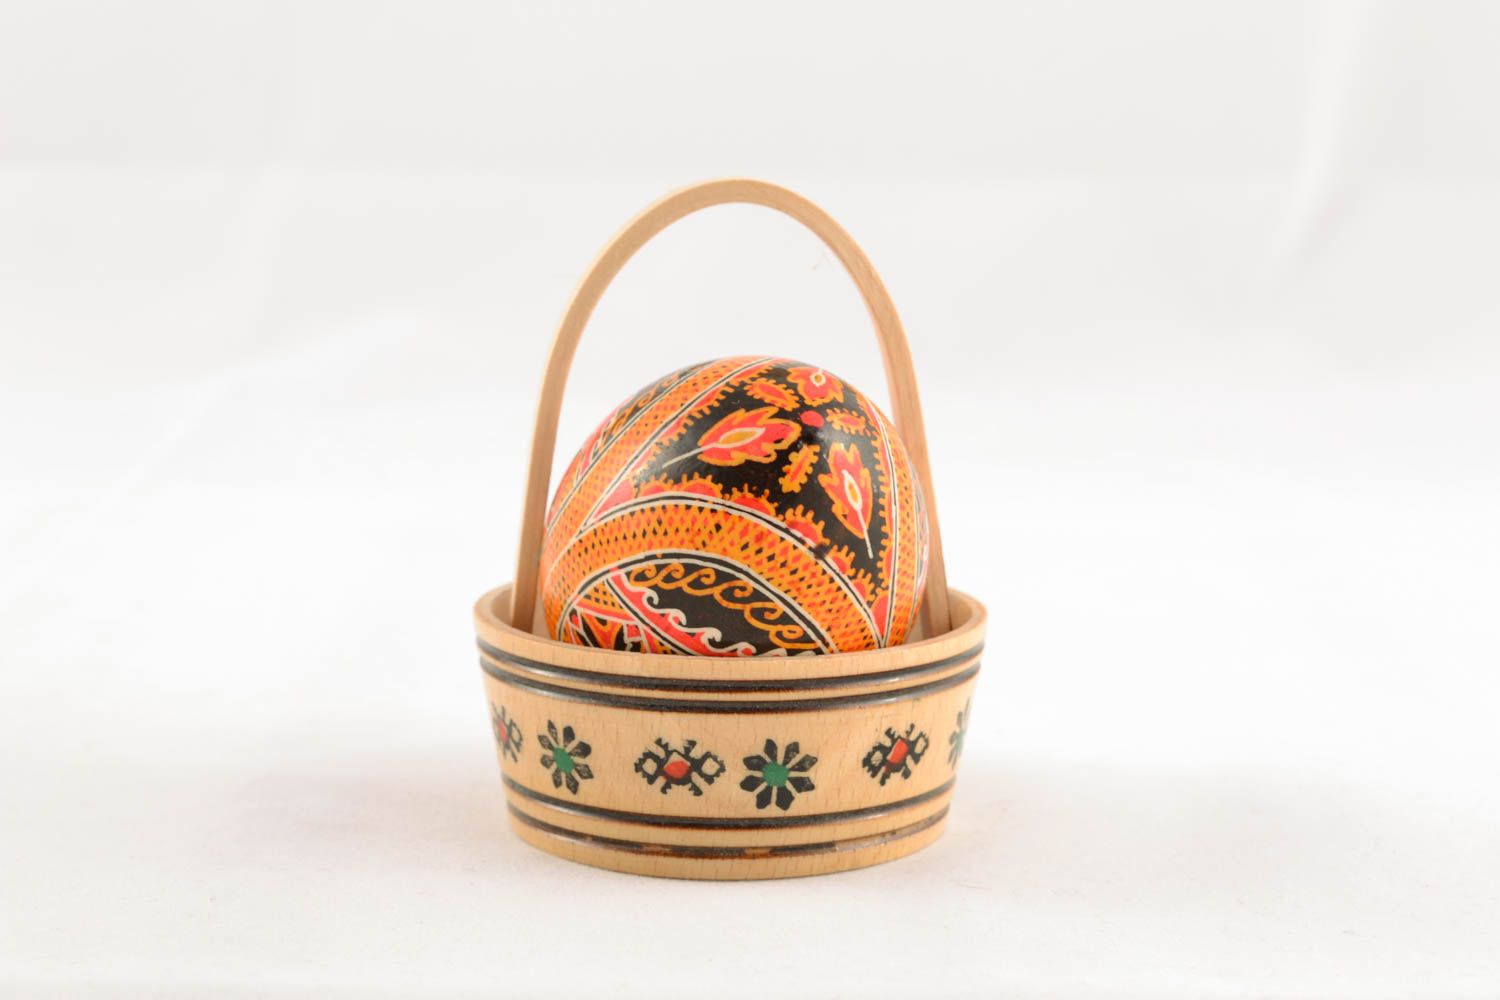 Painted egg in wooden basket photo 1